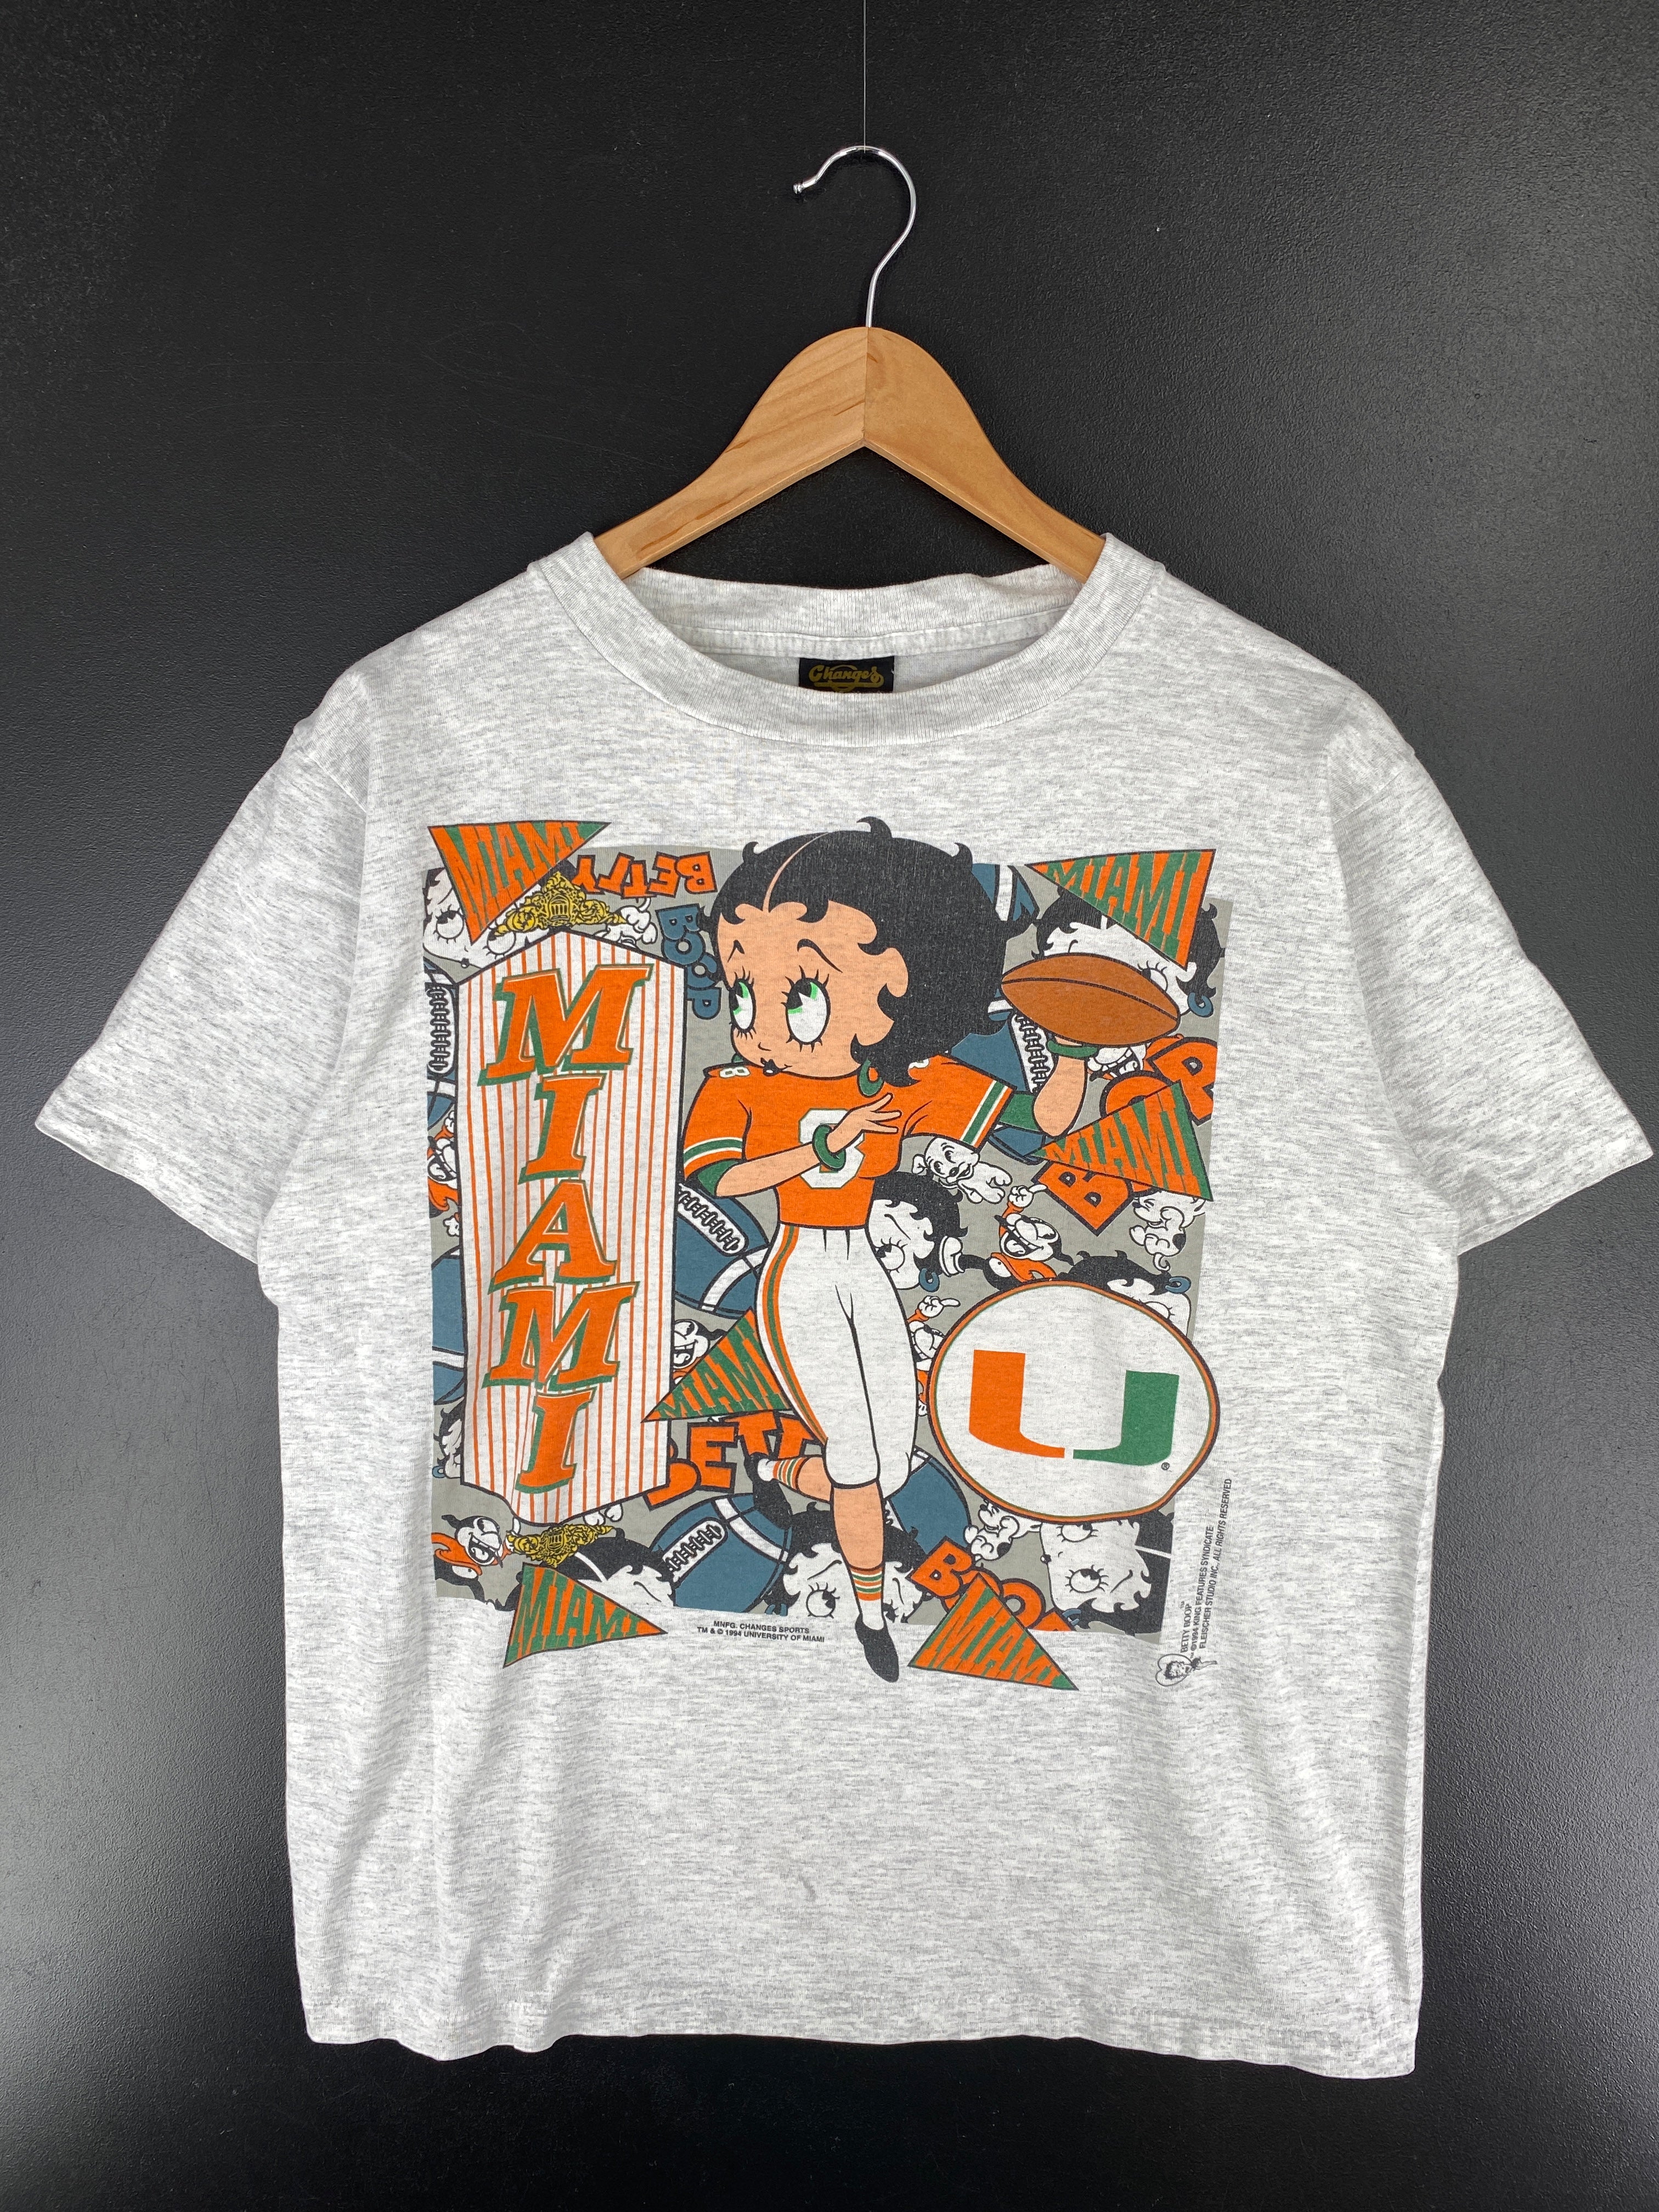 1994 BETTY BOOP UNIVERSITY OF MIAMI Made in USA Size L Vintage T